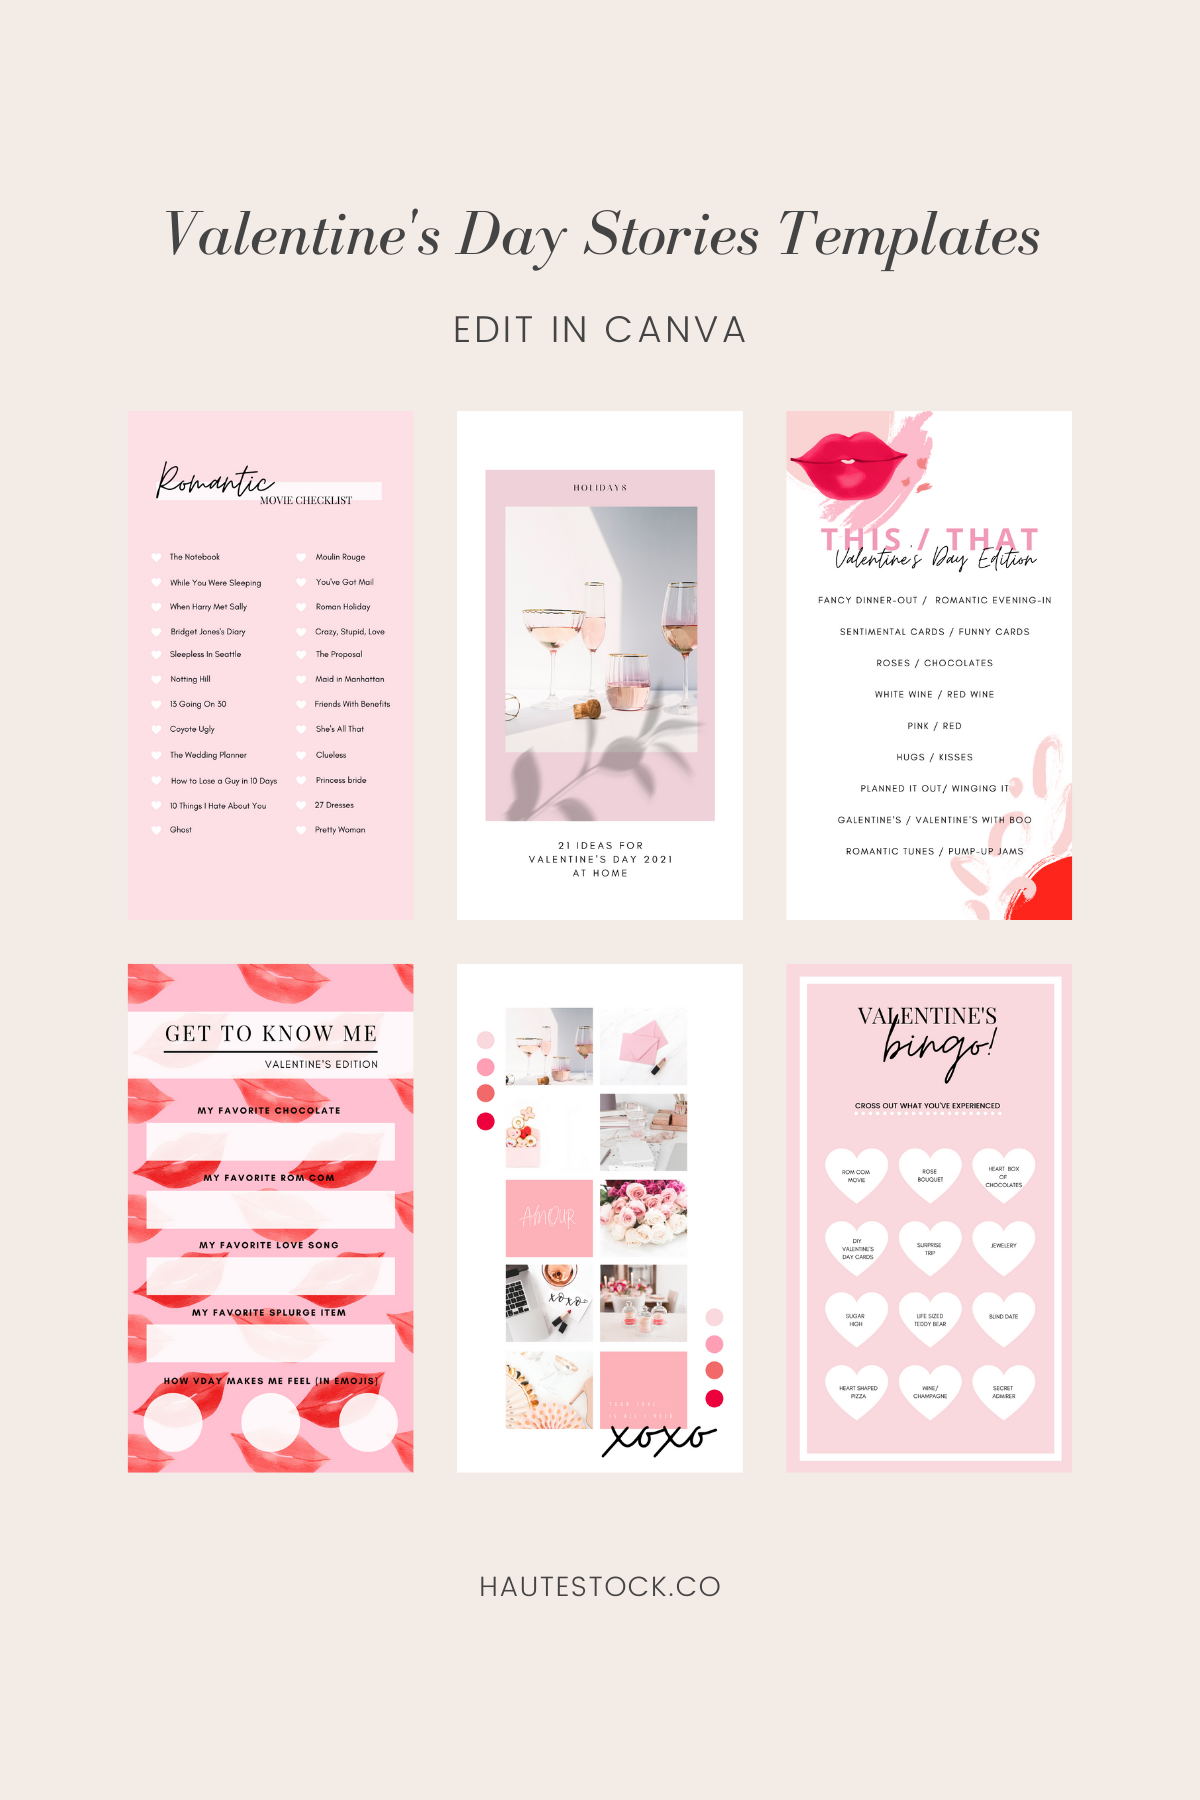 Valentine's Day Canva Templates. Customize these cute Instagram Stories templates in Canva and post them to Insta to get more engagement and interact with your audience on Valentine's Day! Use them for the whole month of Feb to grow your Instagram a…